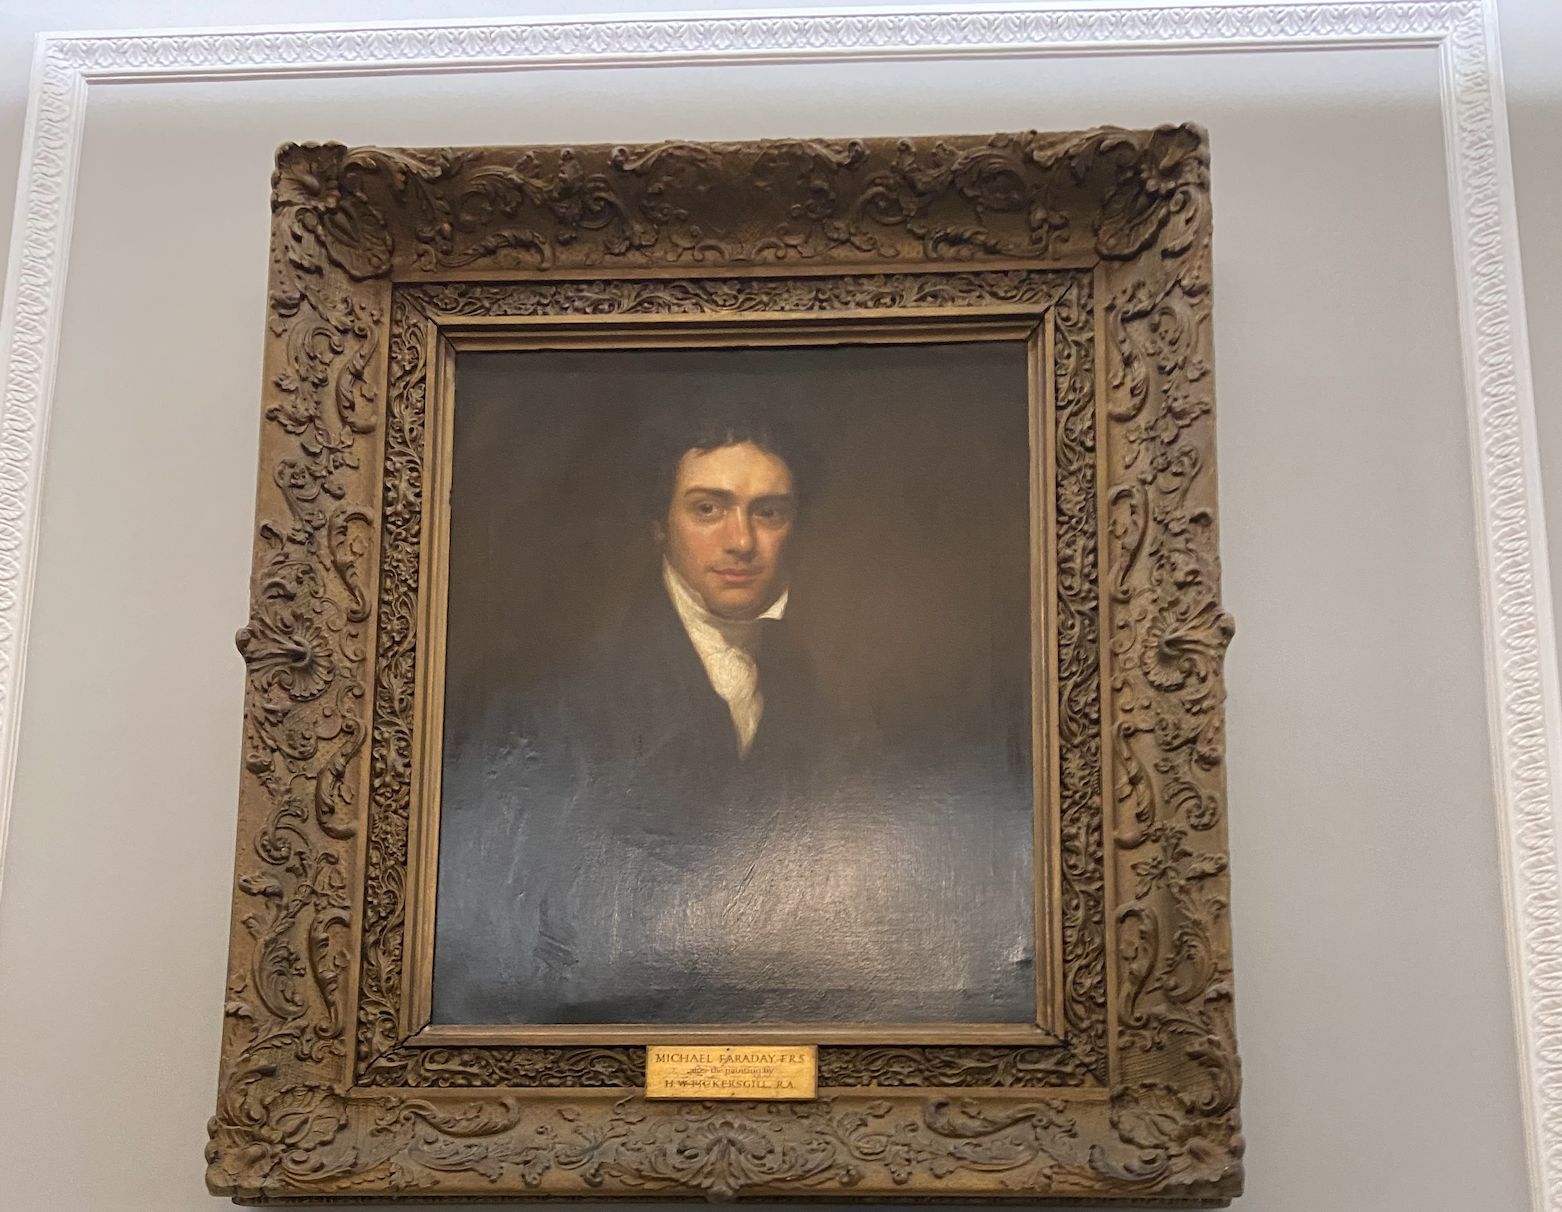 A square painting of Michael Faraday with an intricate wooden frame, standing up, white walls, white middle aged man, brown hair, black waistcoat and white cravat